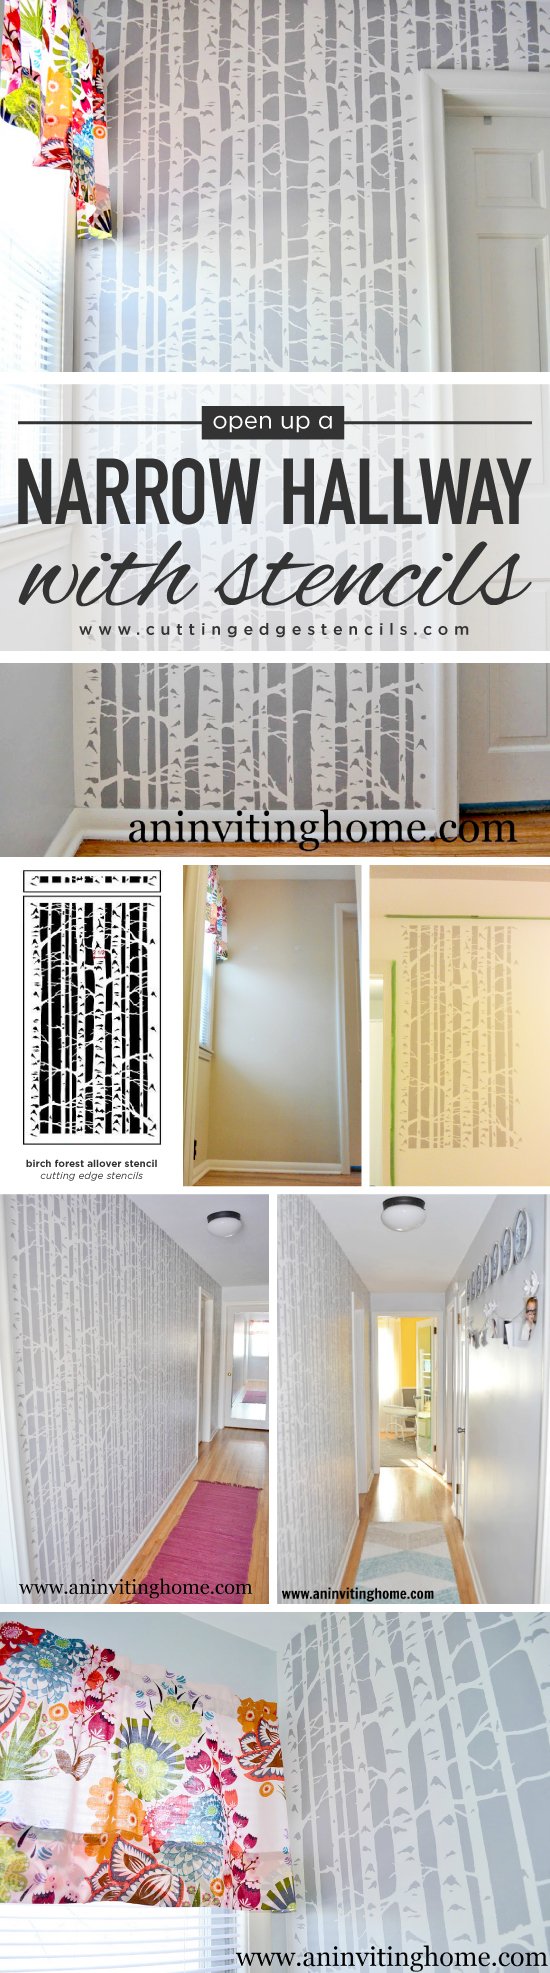 Cutting Edge Stencils shares a DIY stenciled hallway project using the Birch Forest Allover Stencil. http://www.cuttingedgestencils.com/allover-stencil-birch-forest.html